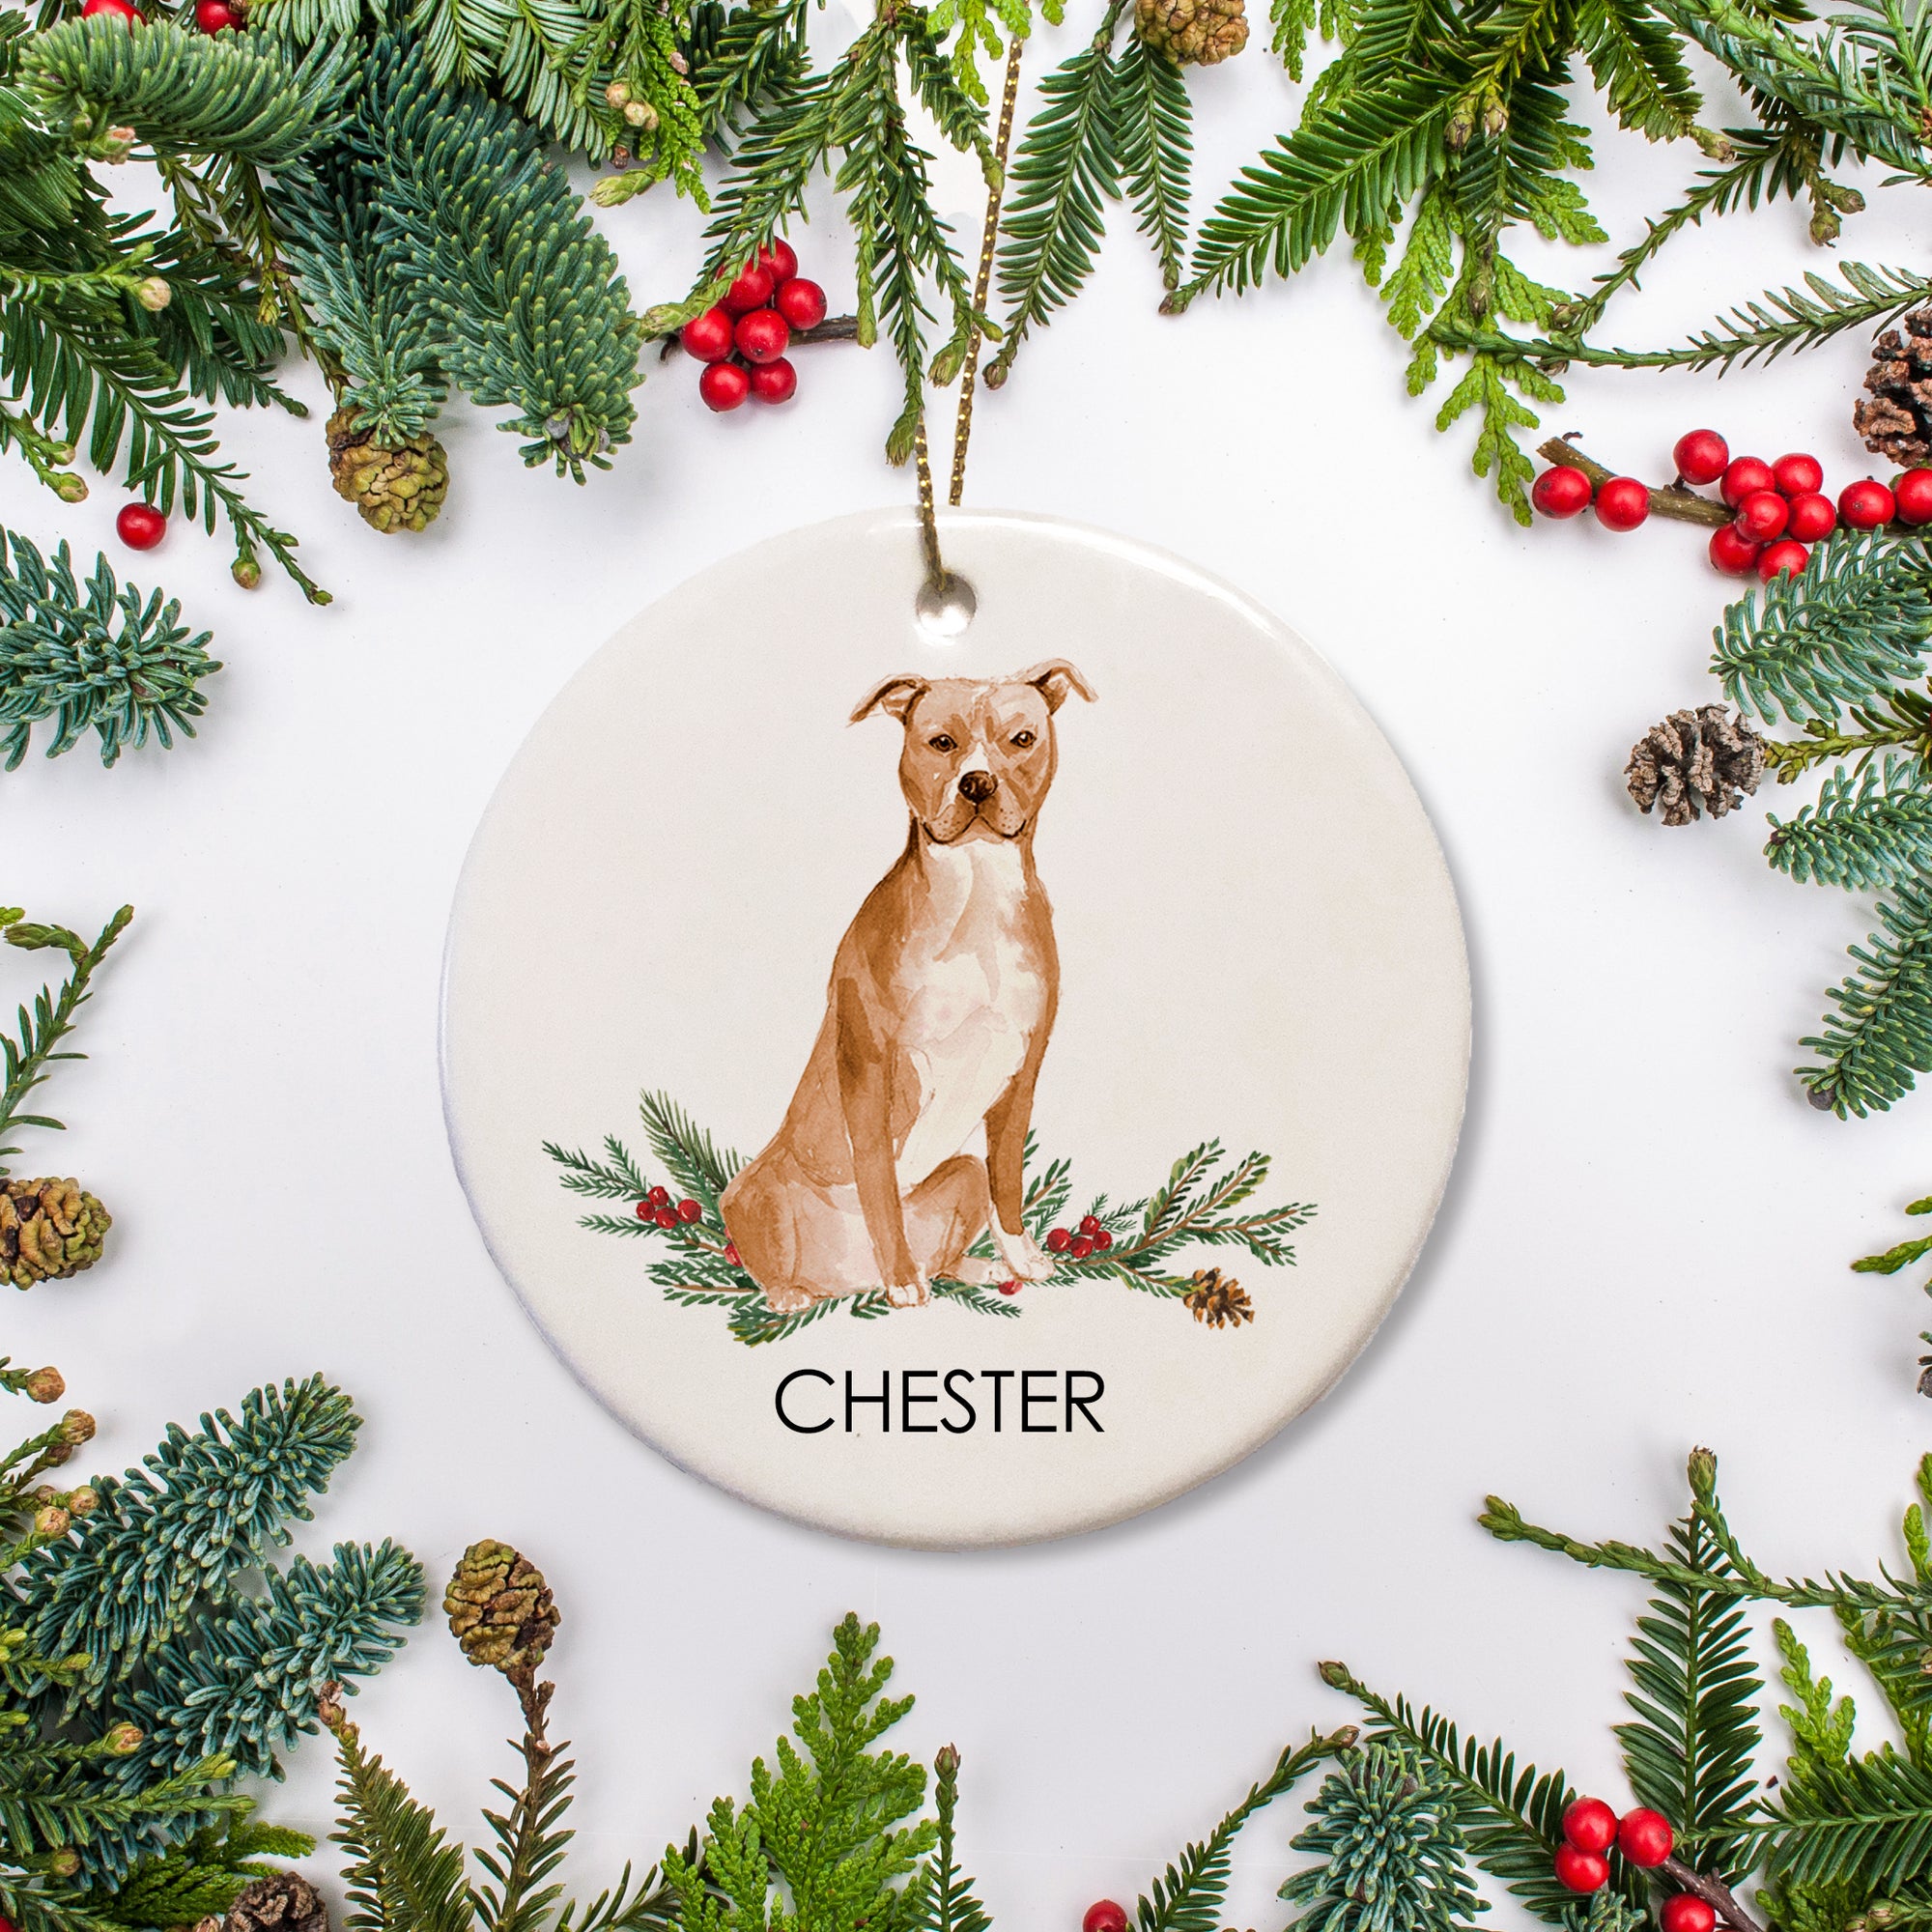 Fawn Pit Bull Christmas Ornament, personalized with your dogs name. This ceramic ornament as the option for a custom text message on the back side.